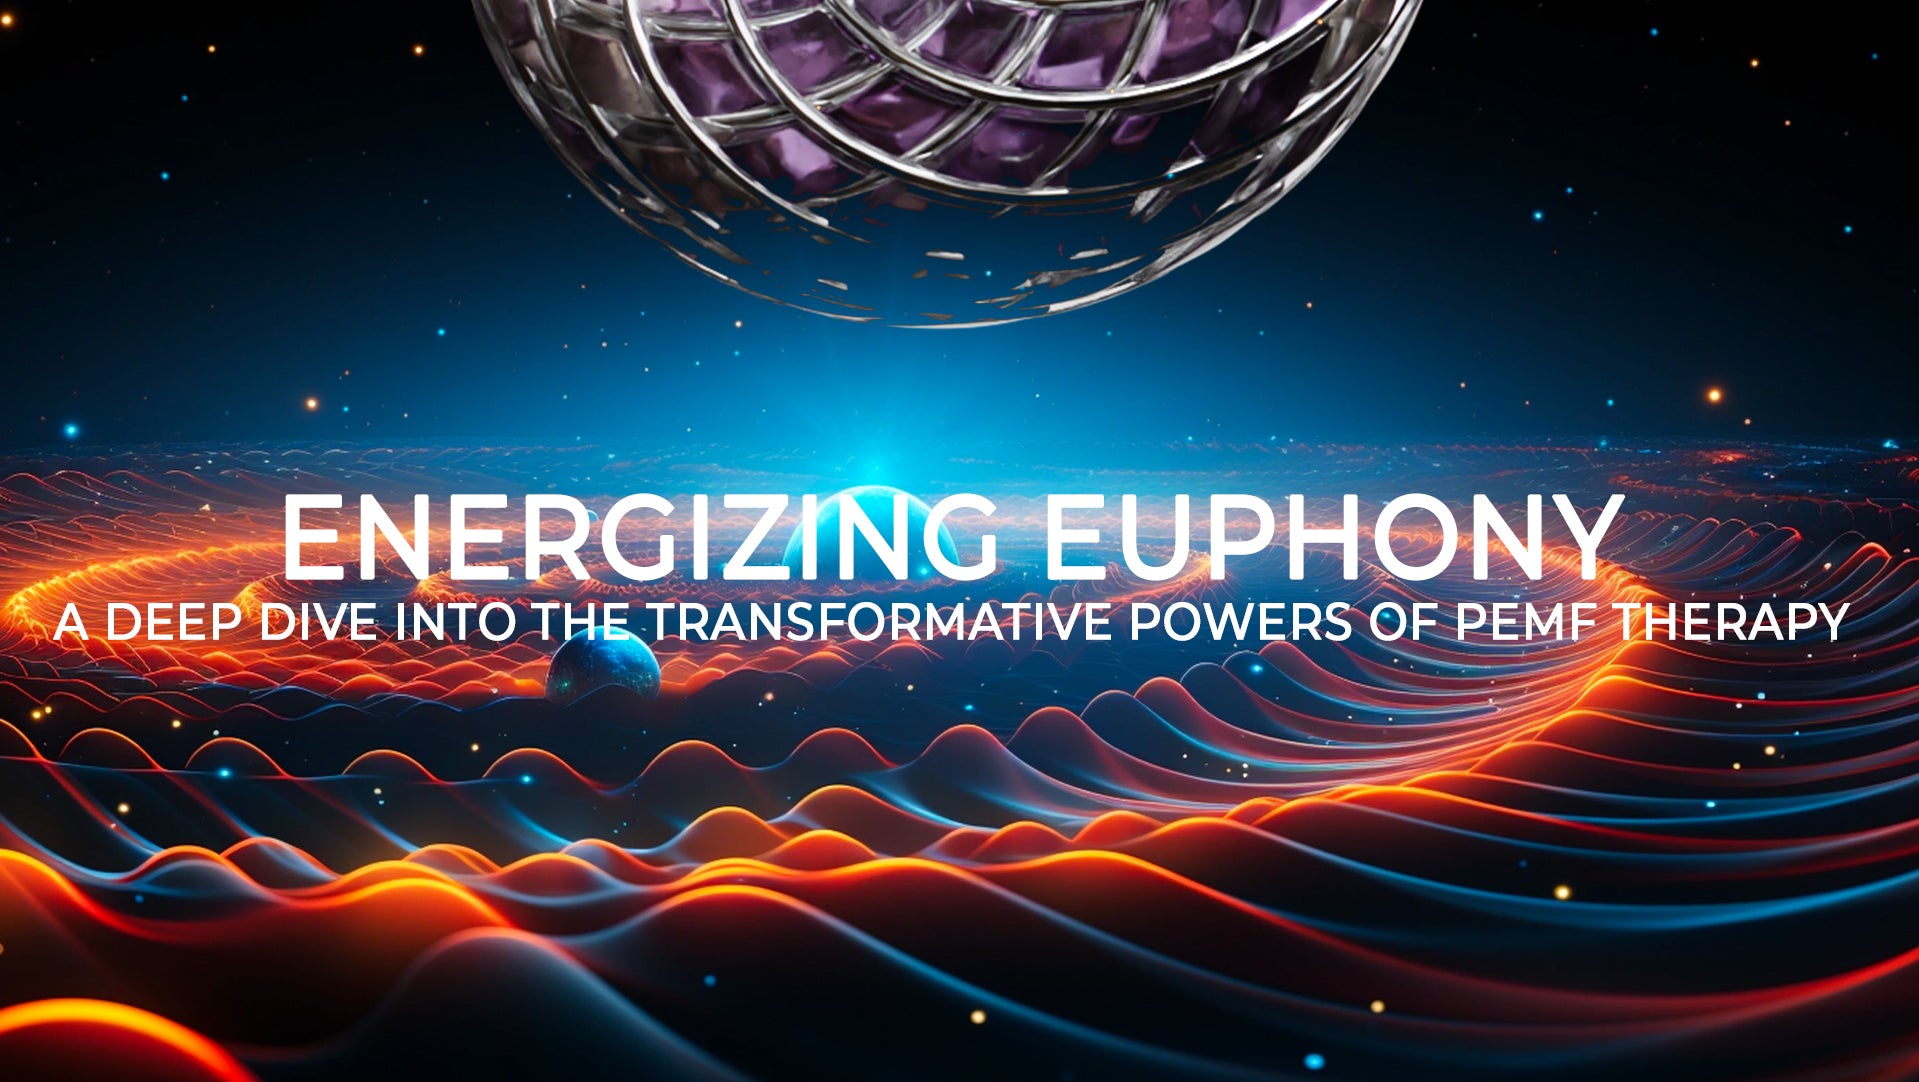 Energizing Euphony: A Deep Dive into the Transformative Powers of PEMF Therapy